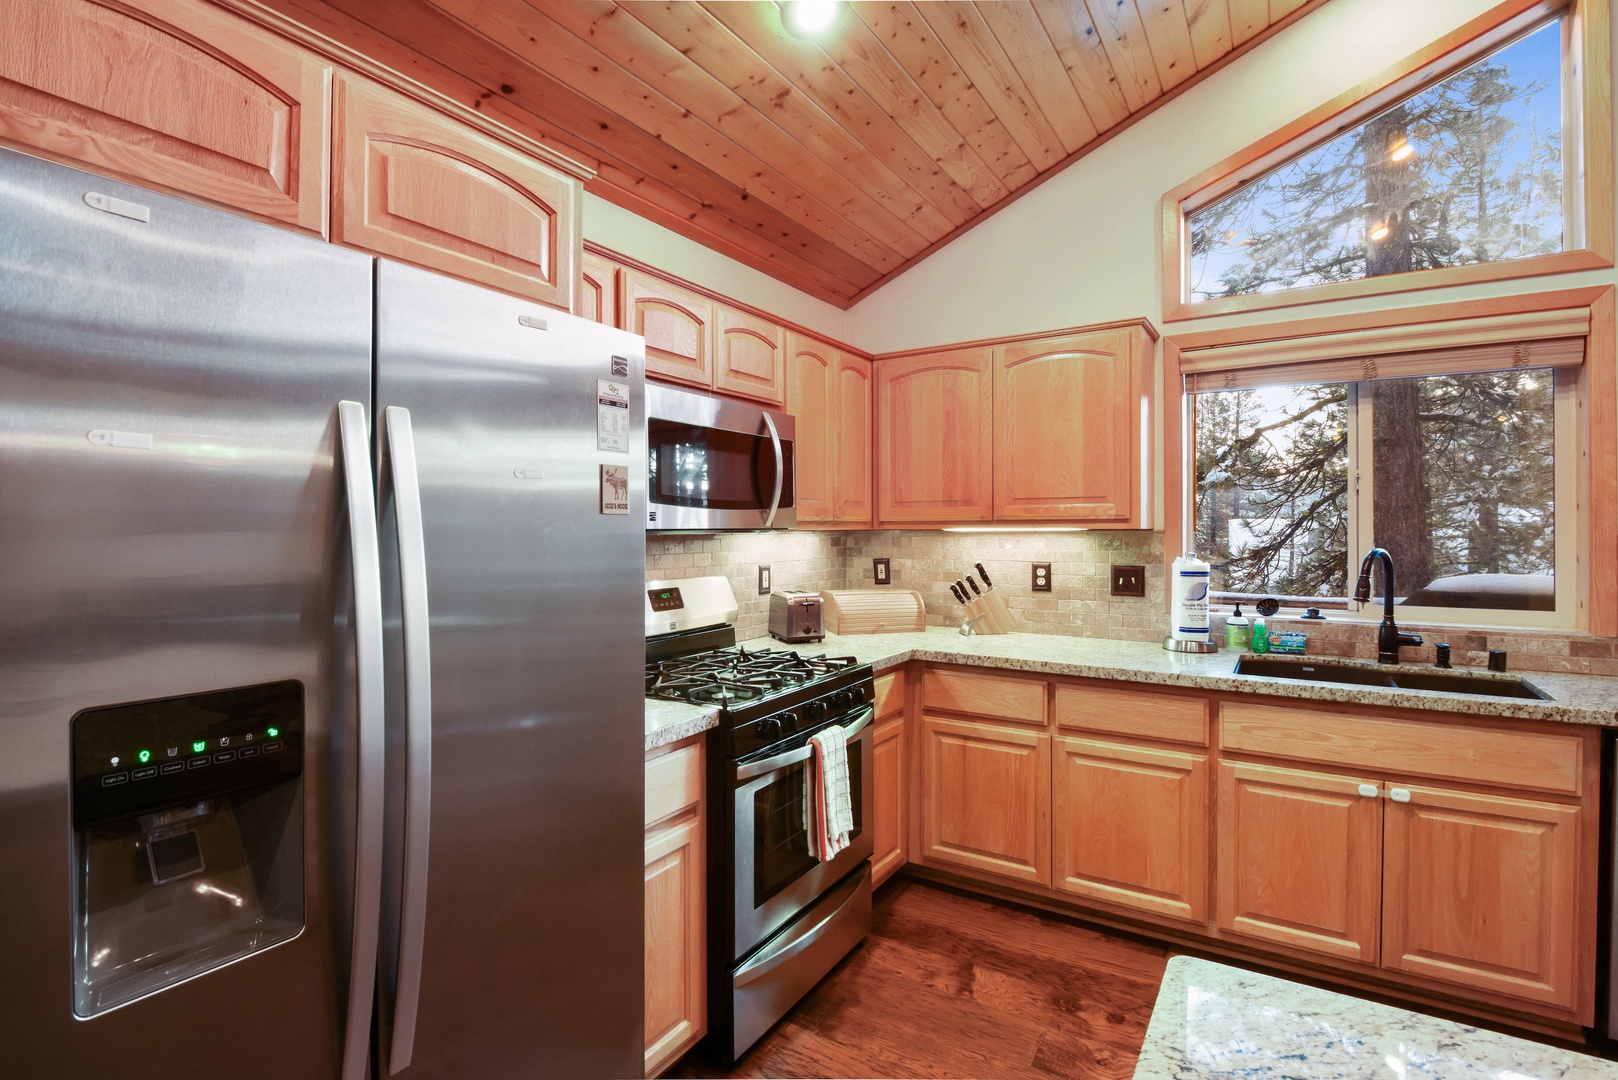 Kitchen with drip coffee pot, toaster, dishwasher, and more